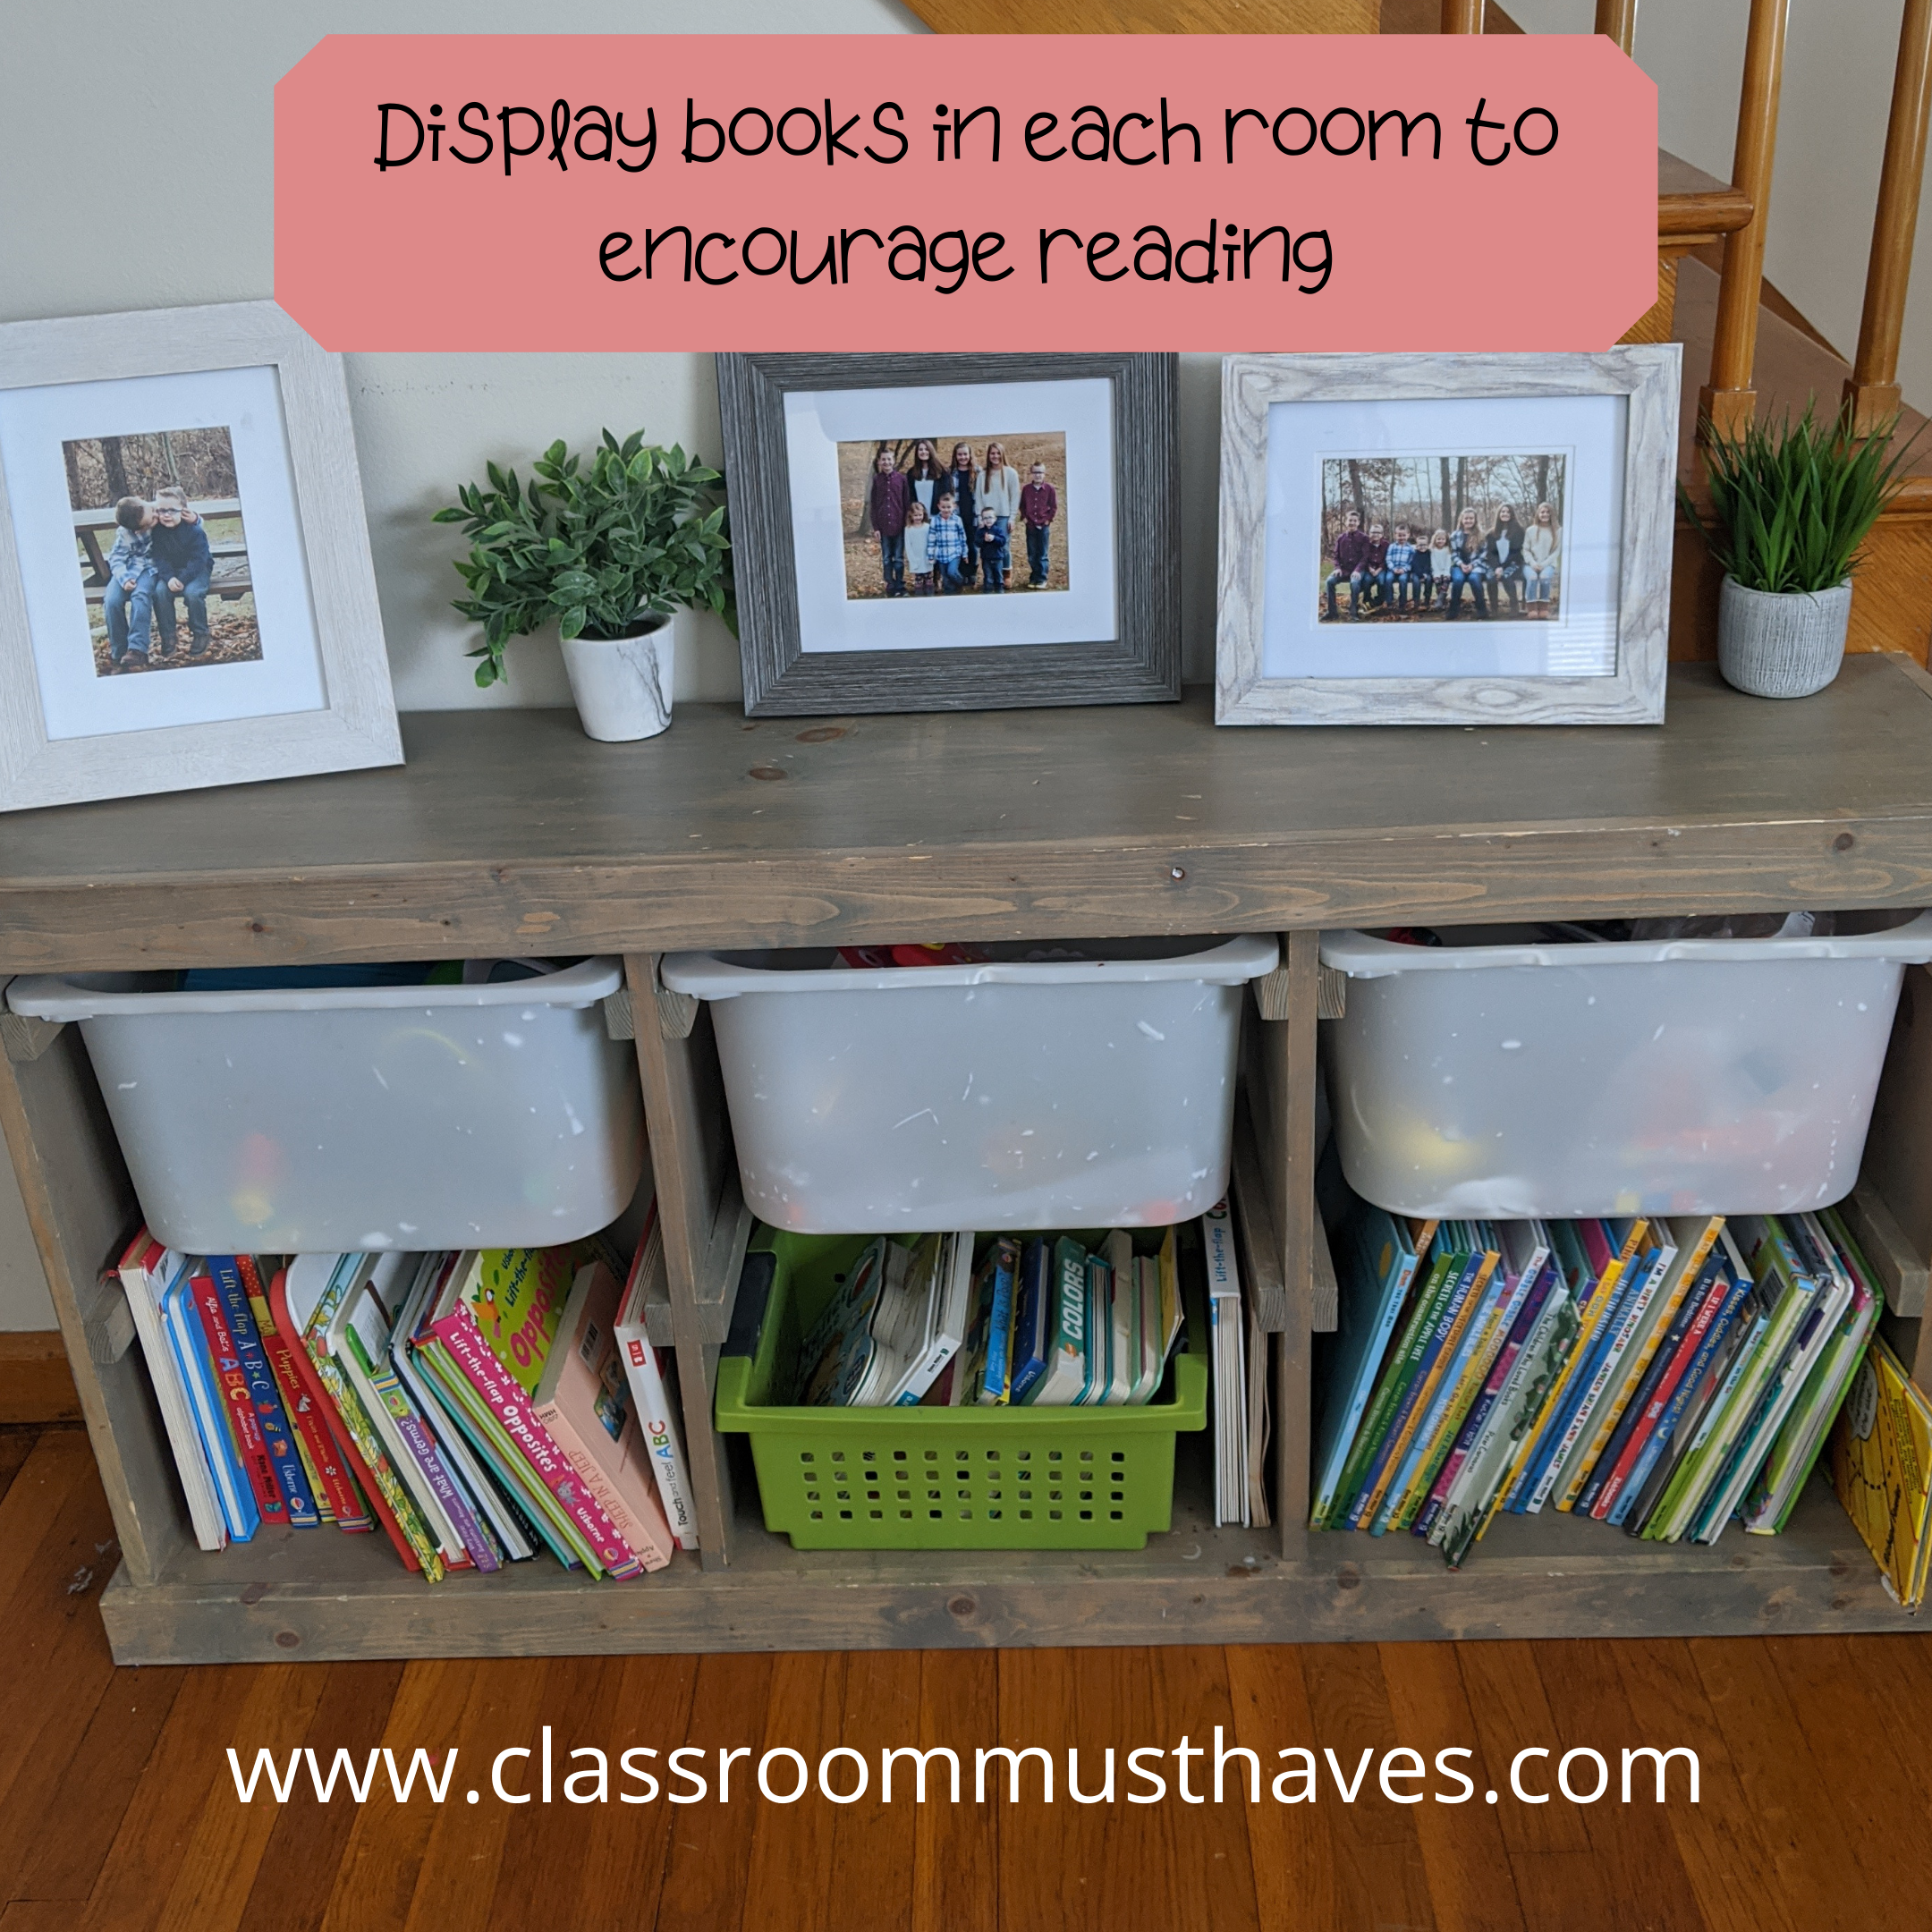 Display books in each room